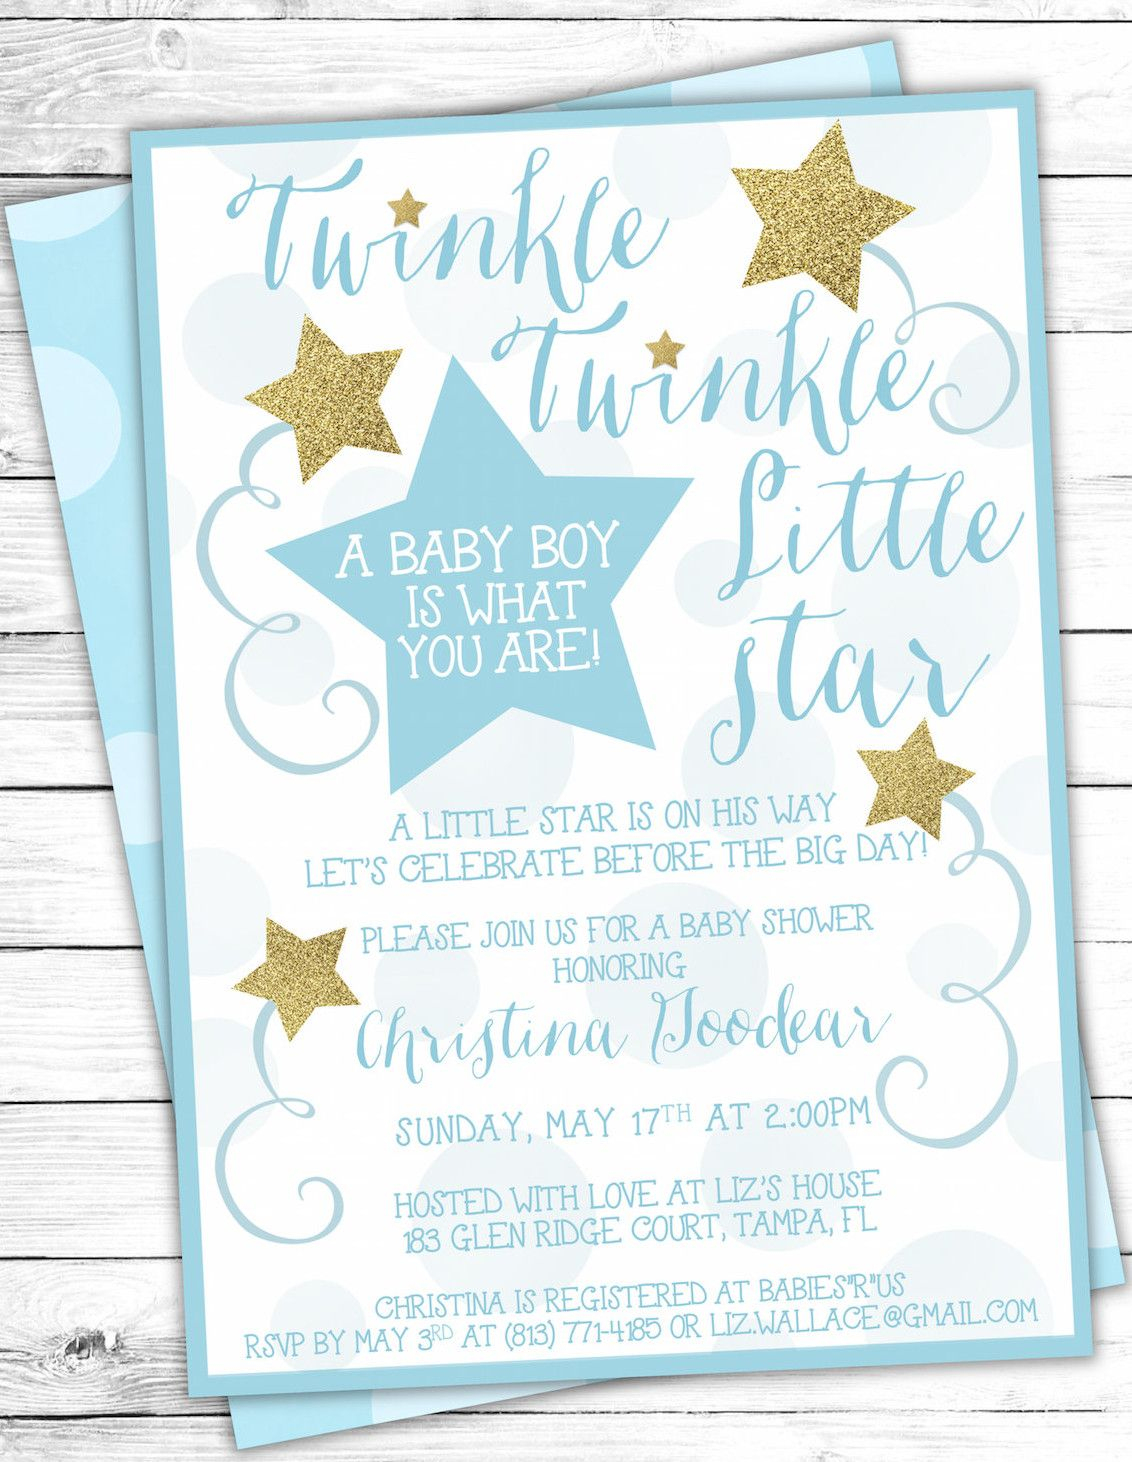 Twinkle Twinkle Little Star Party Theme Planning, Ideas &amp;amp; Supplies - Free Printable Twinkle Twinkle Little Star Baby Shower Invitations